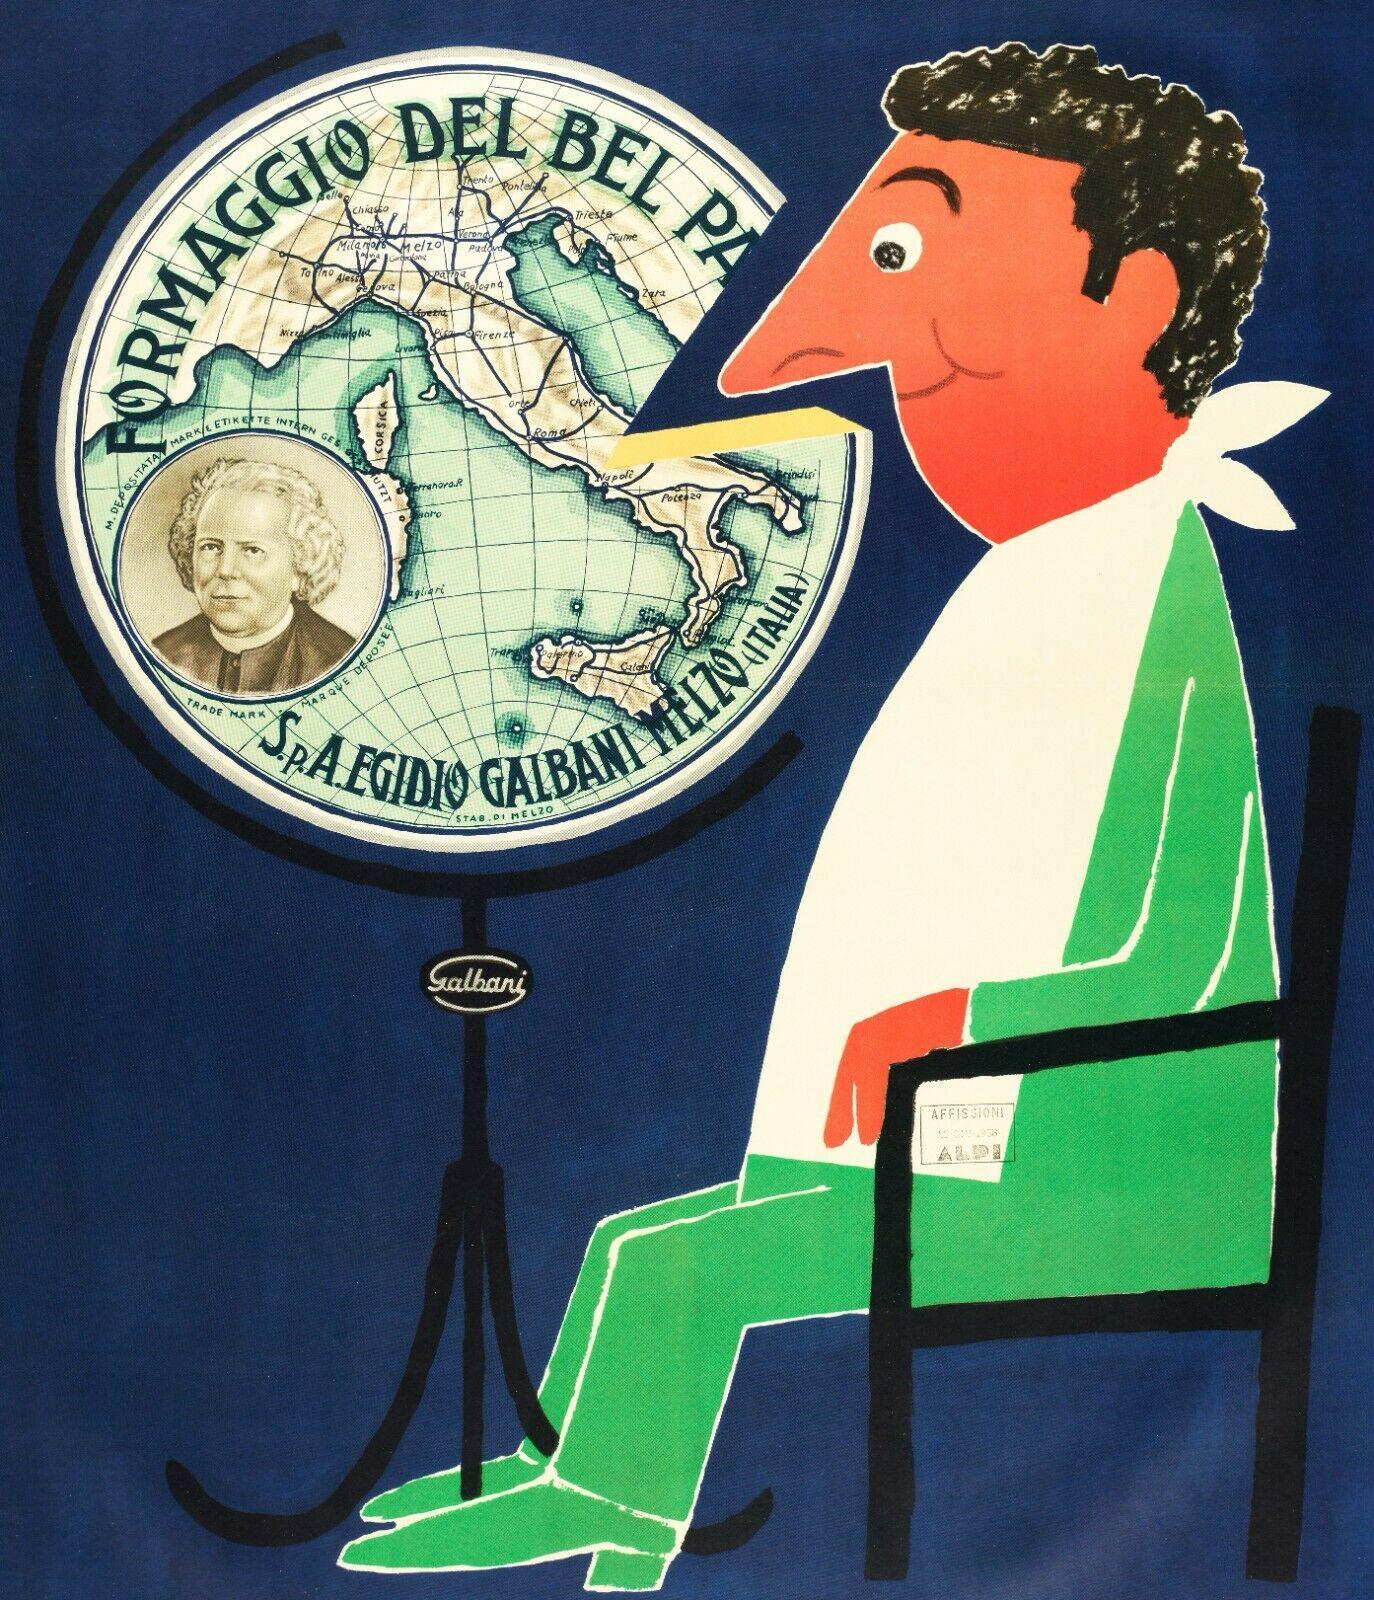 Original Vintage Poster-R Savignac-Bel Paese Cheese-Italien-Galbani, 1966

A wheel of cheese resembling a globe is facing a man sitting and ready to taste it. The nose of the man with the colors of Italy (green - white - red) represents the shape of